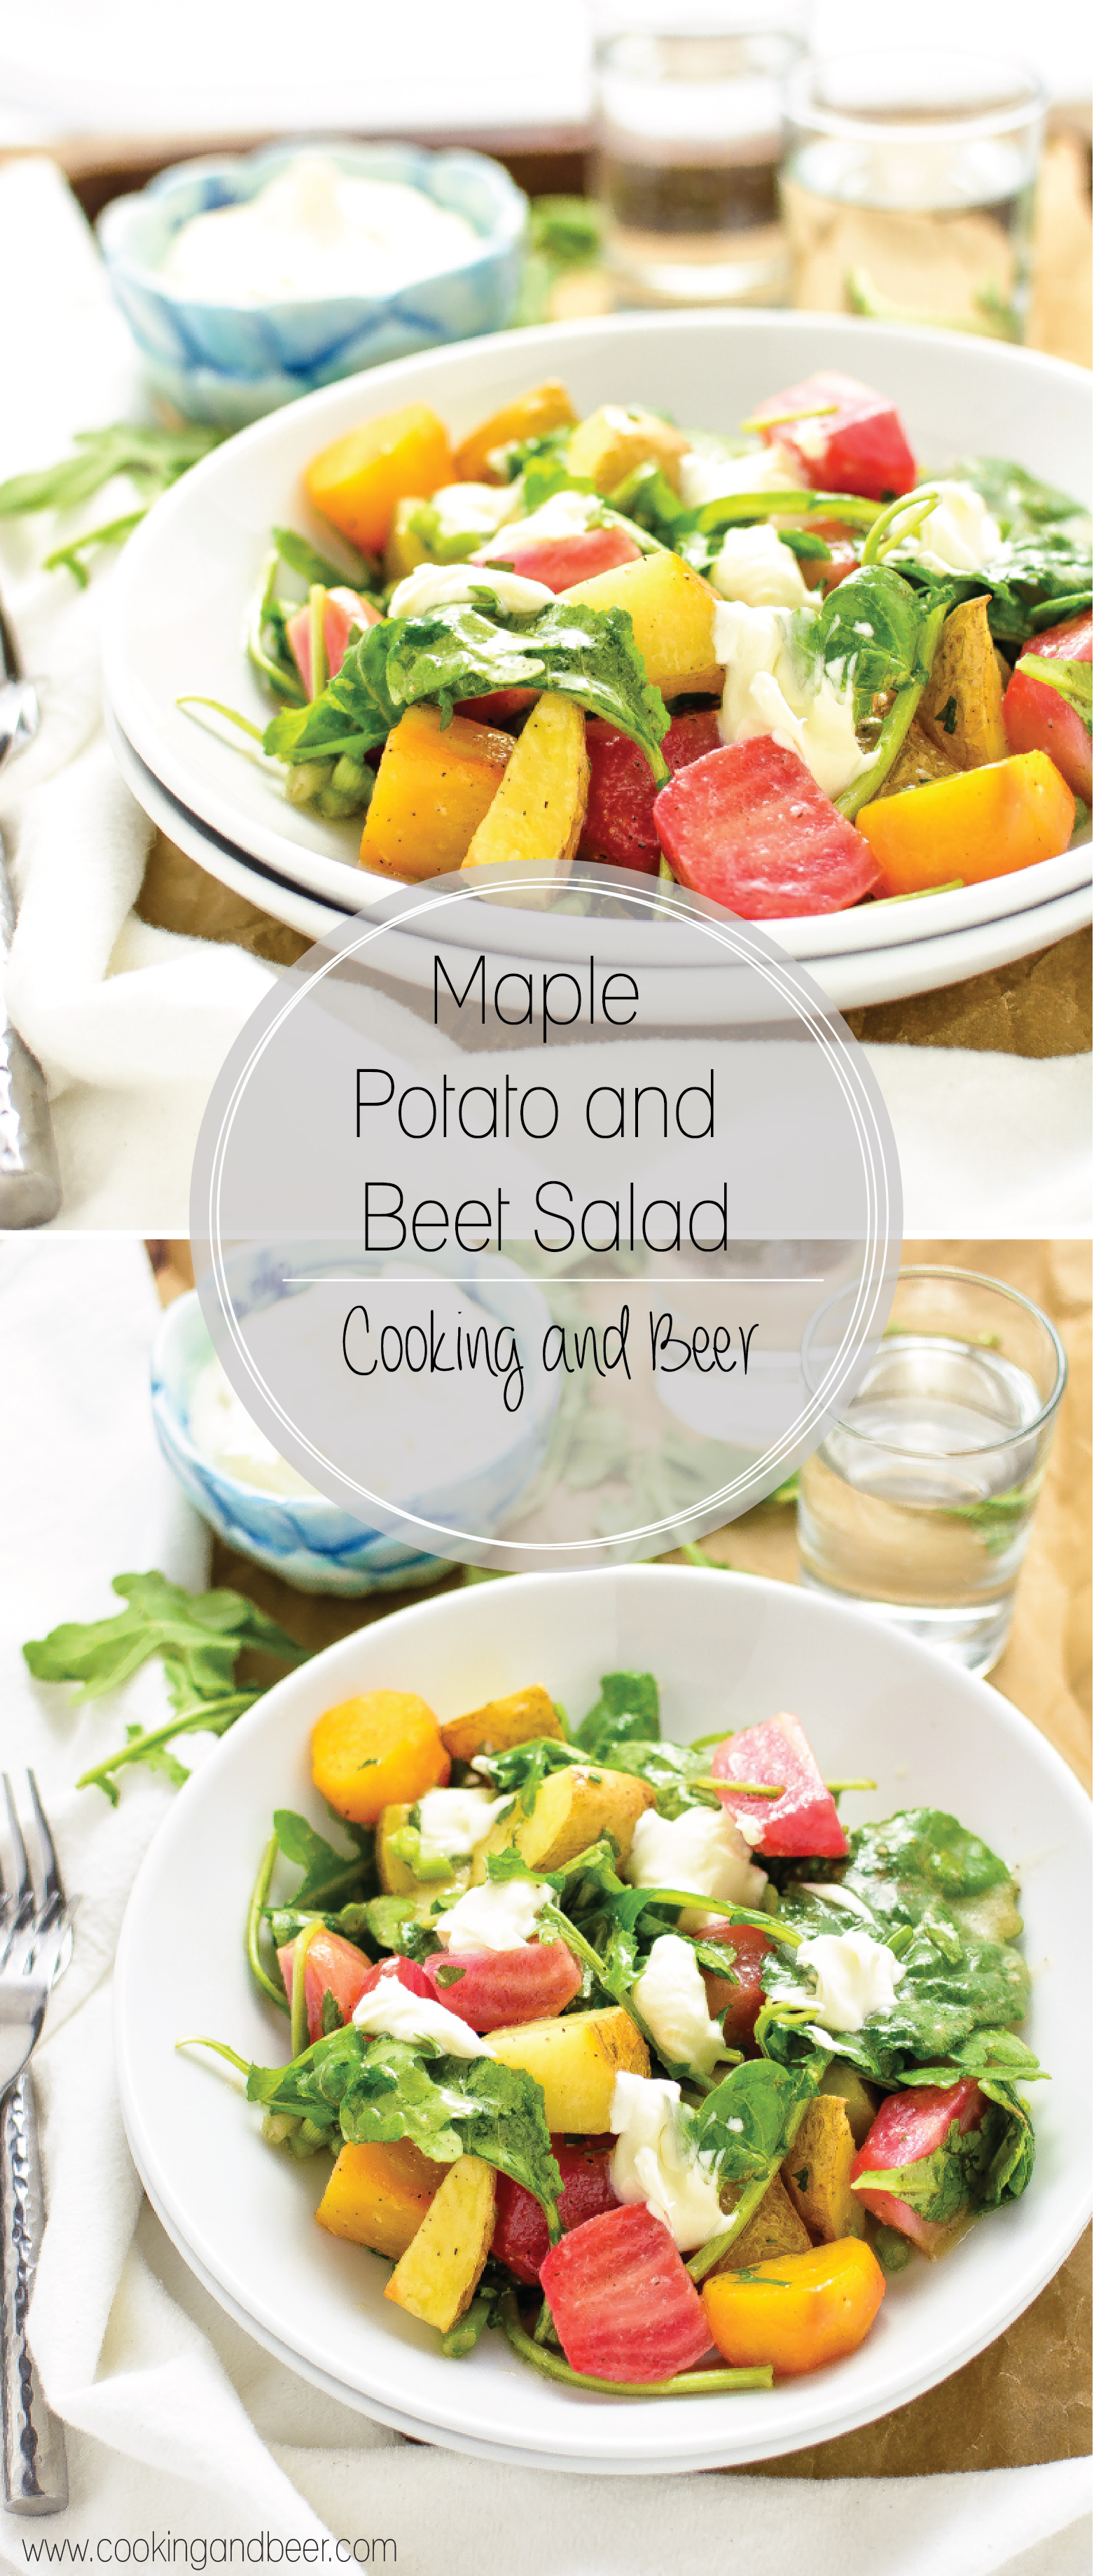 Maple Potato and Beet Salad is a light, yet hearty fall salad loaded with mustard flavor.